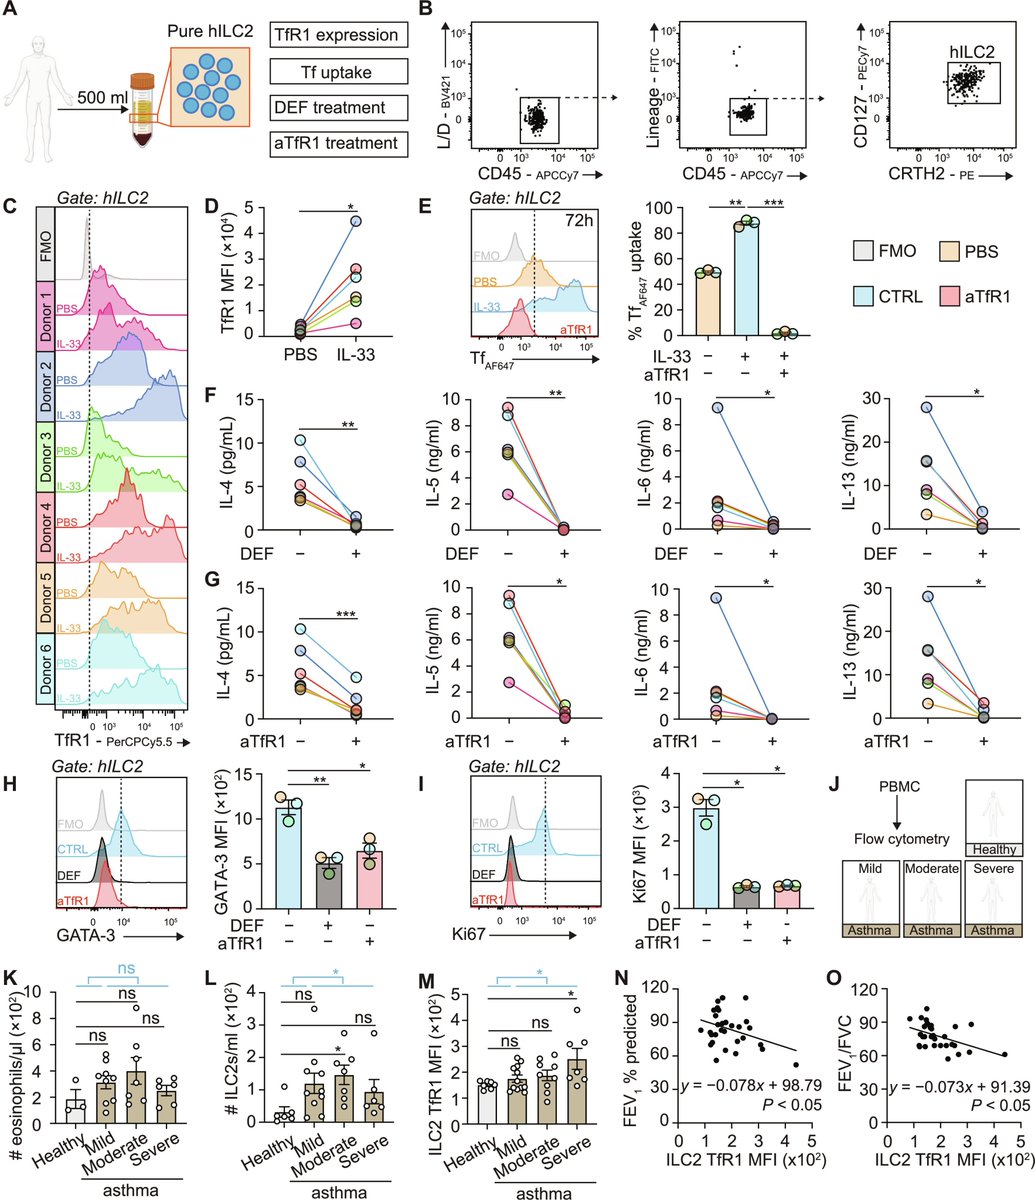 Iron regulates the metabolism and effector functions of ILC2s in murine and humanized models of ILC2-dependent allergic asthma @ScienceTM 
science.org/doi/10.1126/sc…